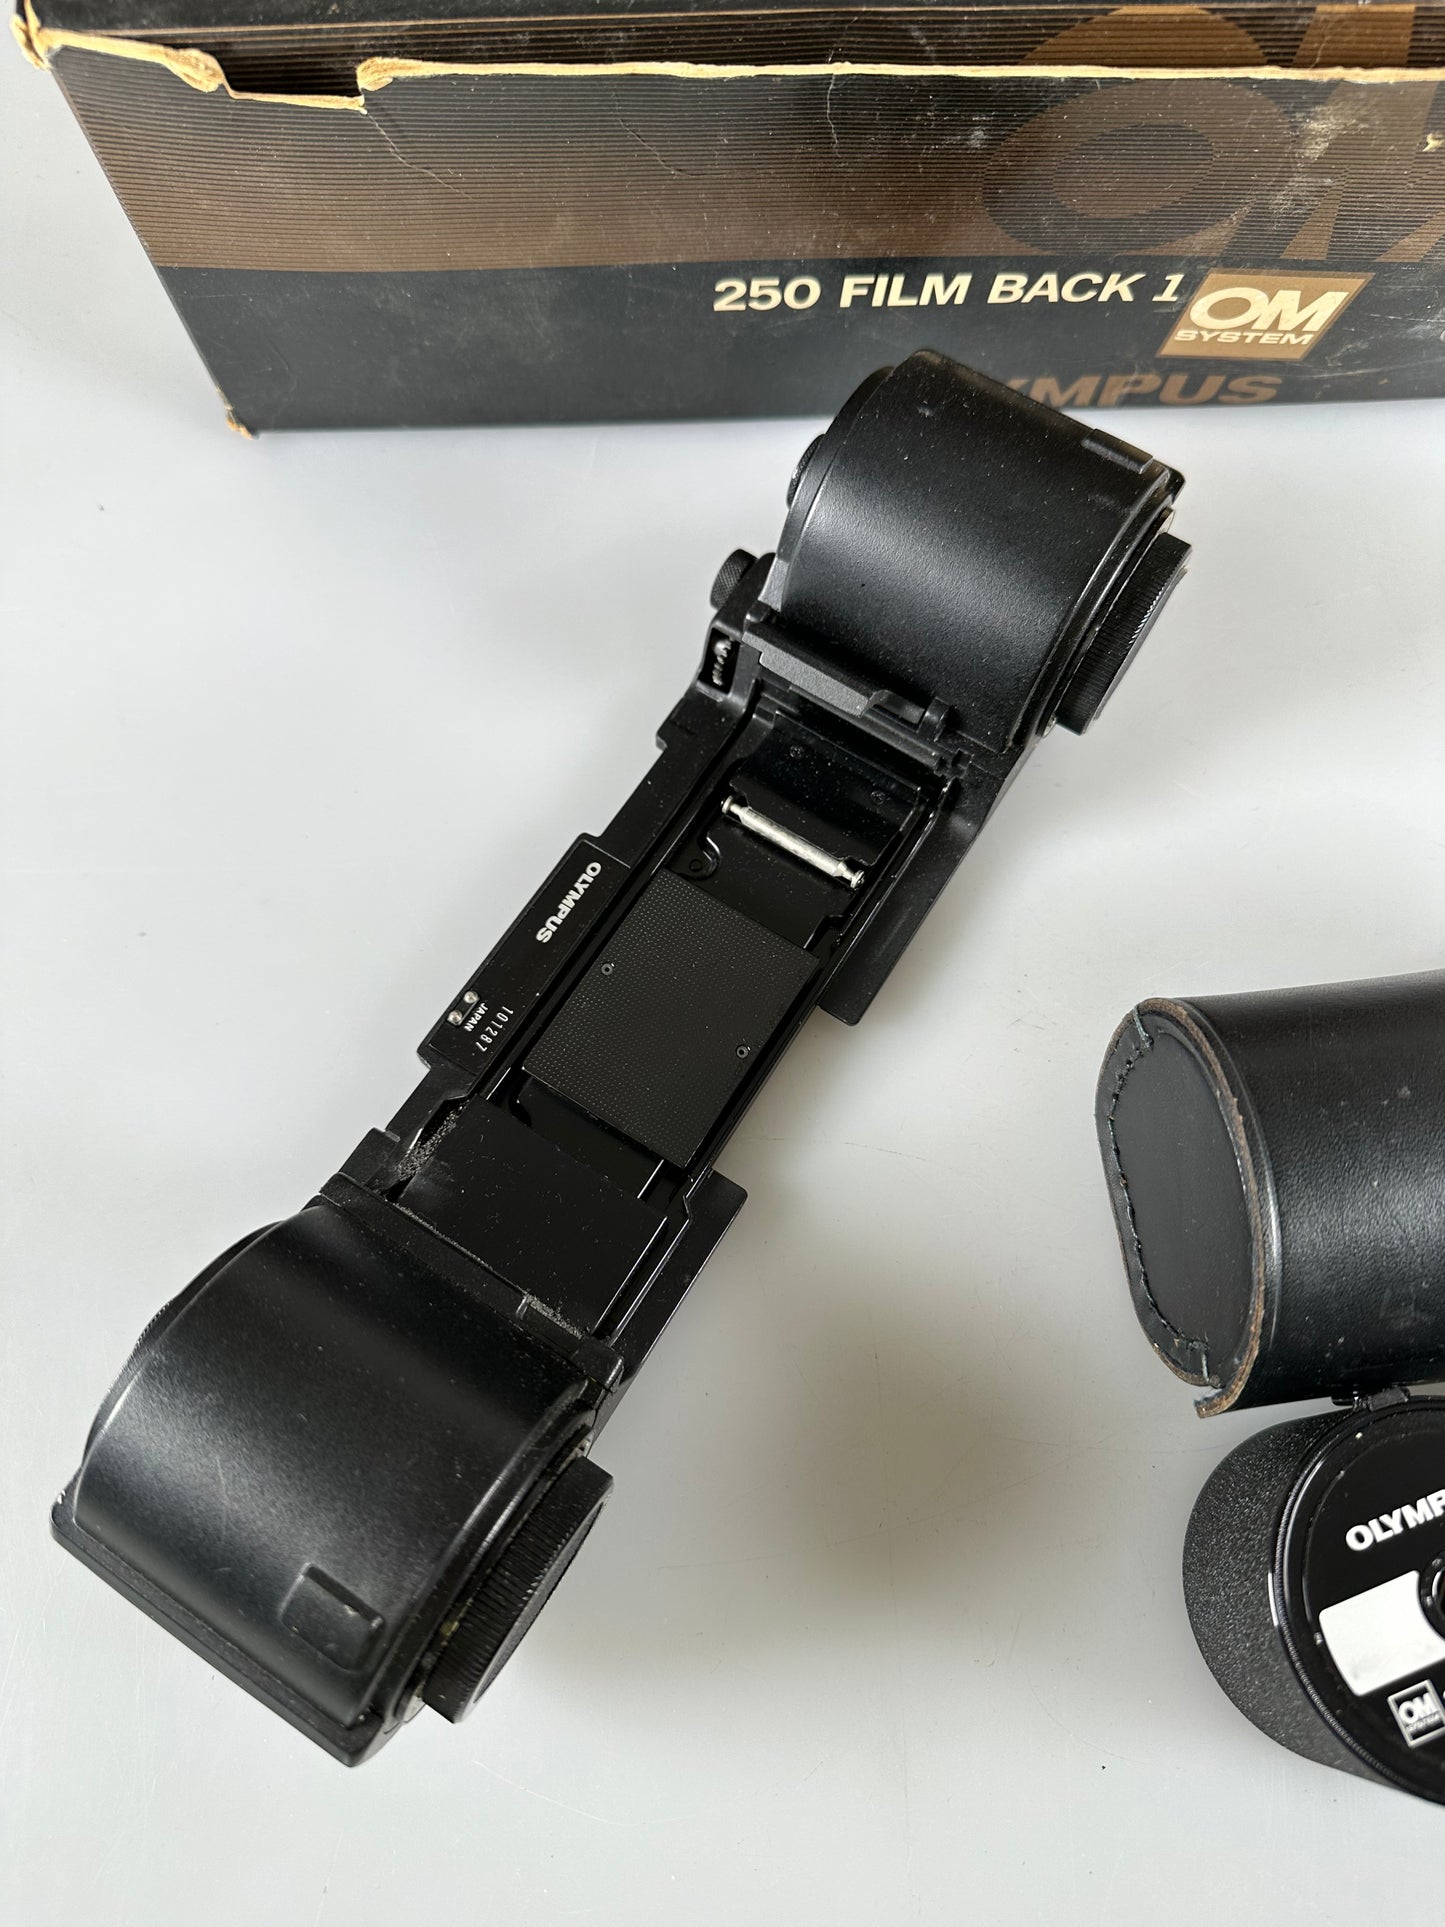 Olympus 250 Film Back 1 for OM System Cameras with cassettes